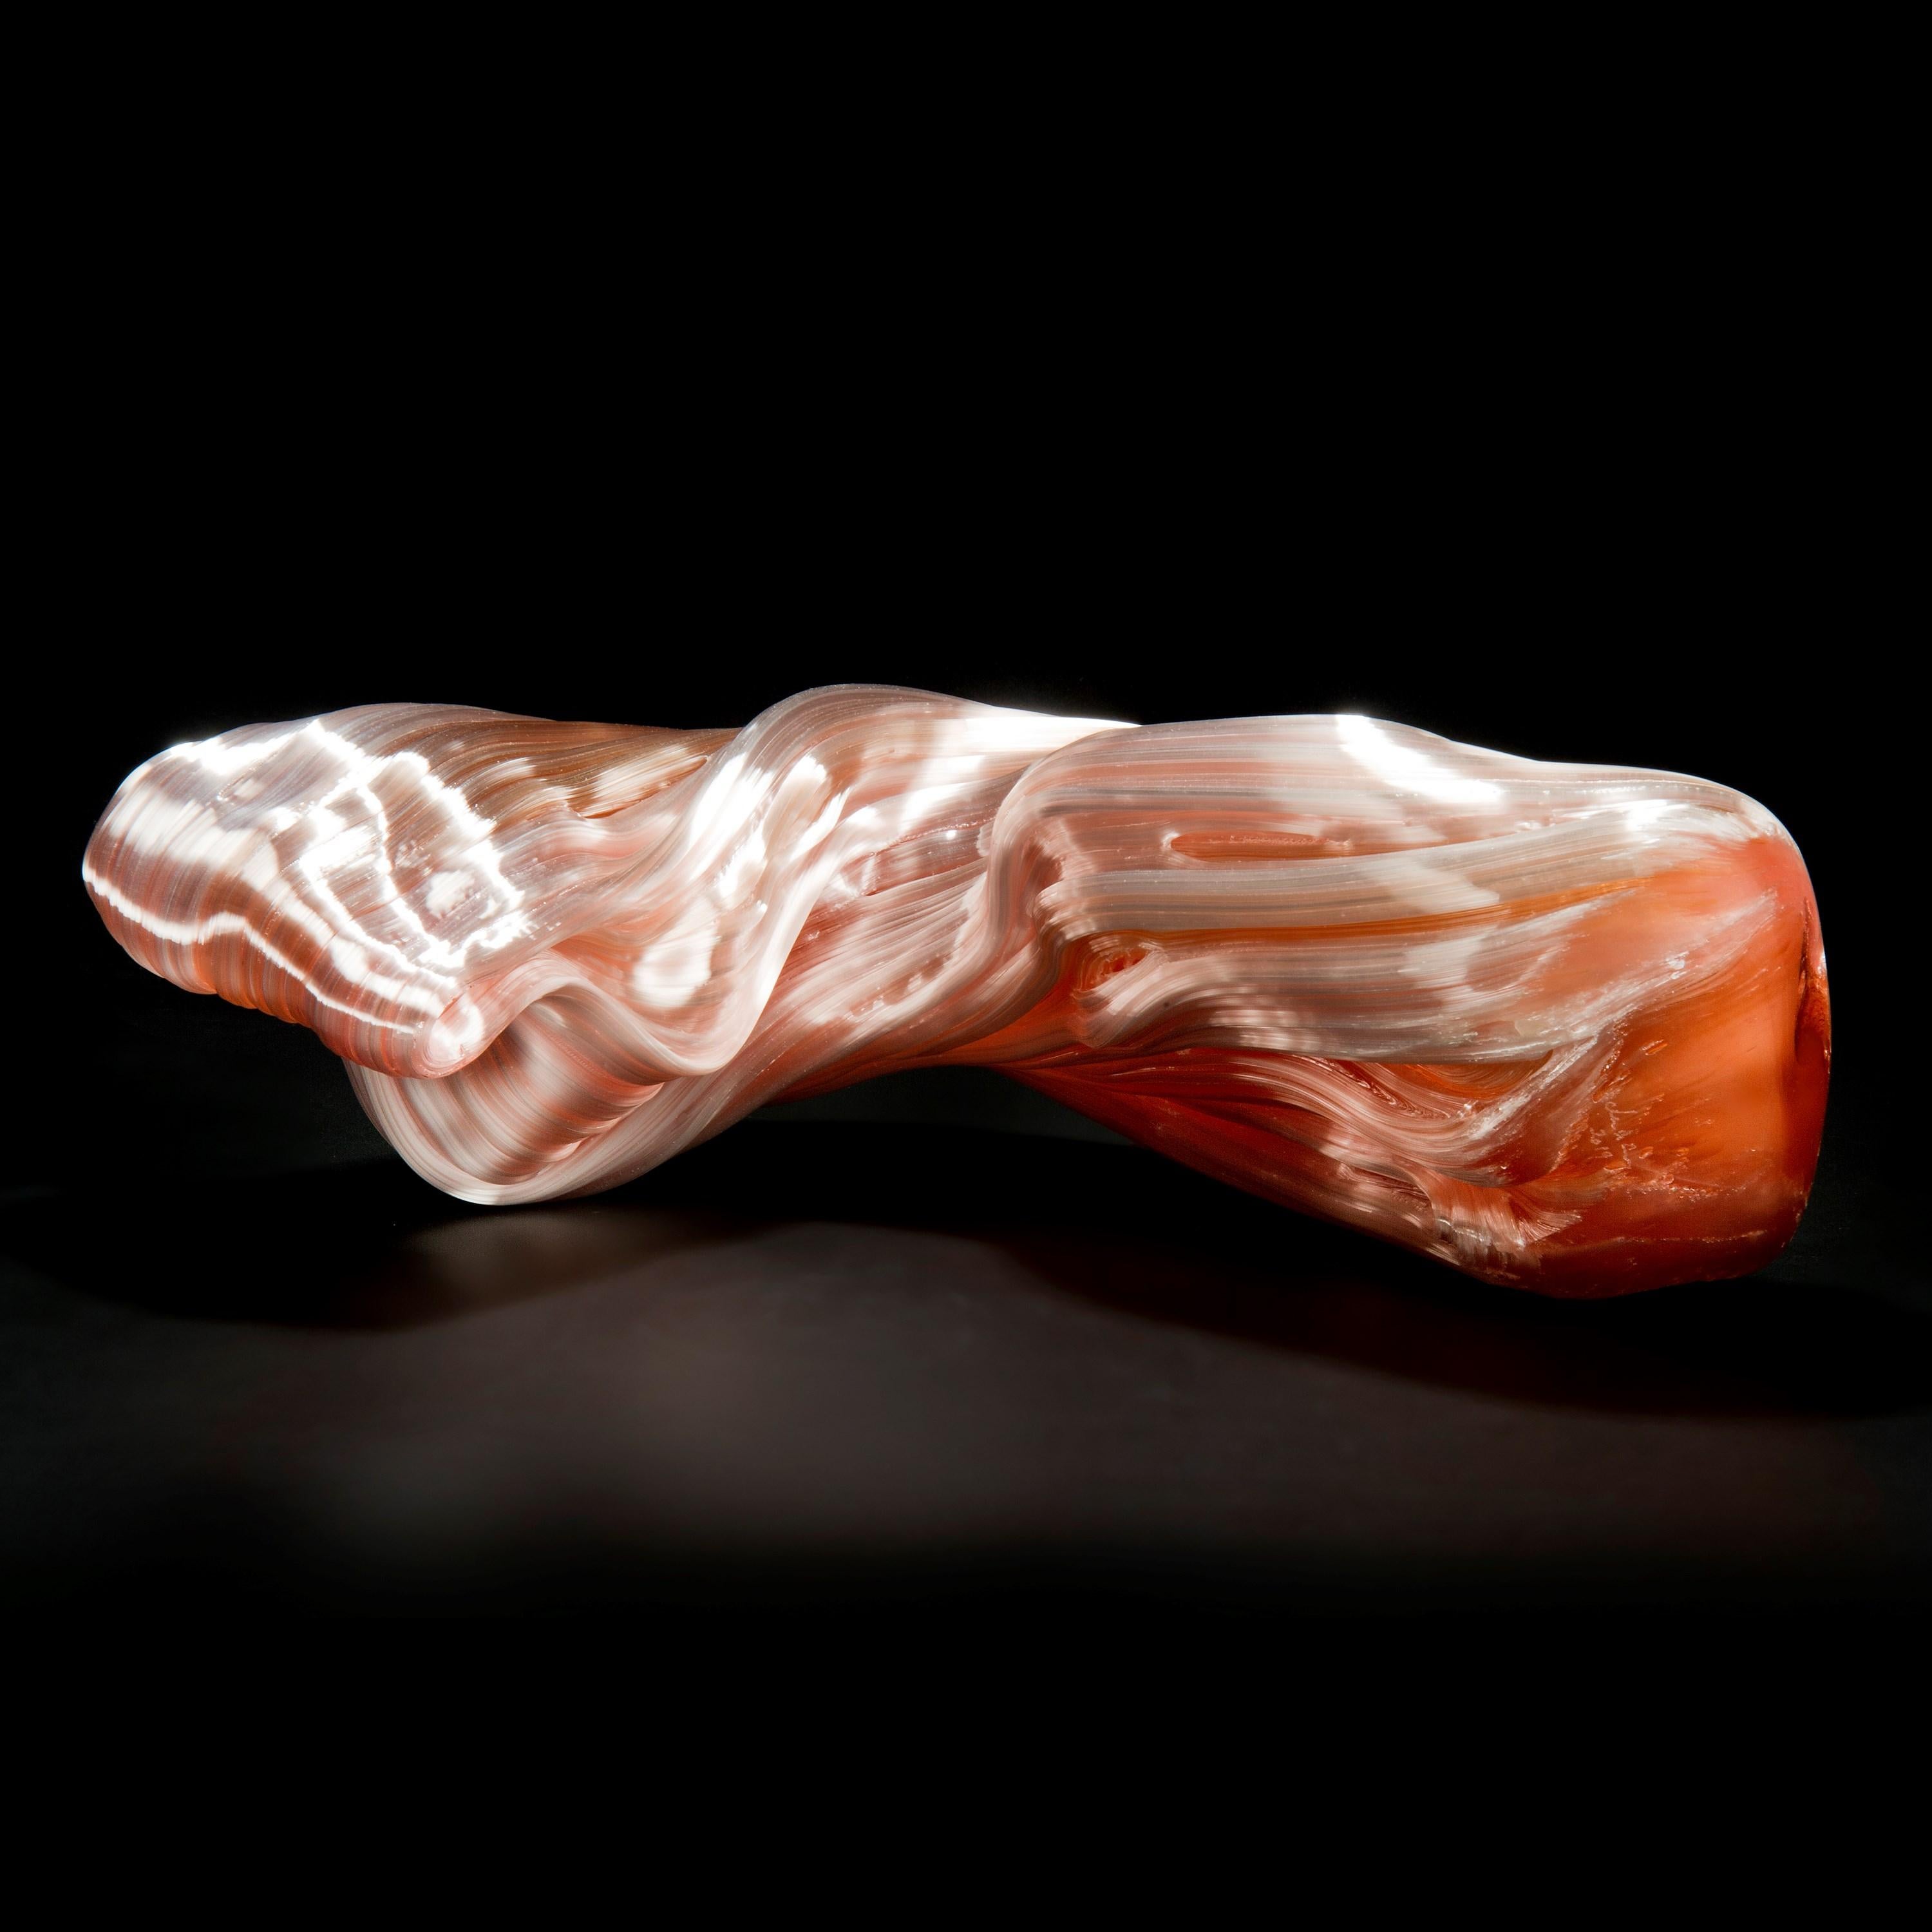 British Curve in Coral, a Unique coral pink Glass Sculpture by Maria Bang Espersen